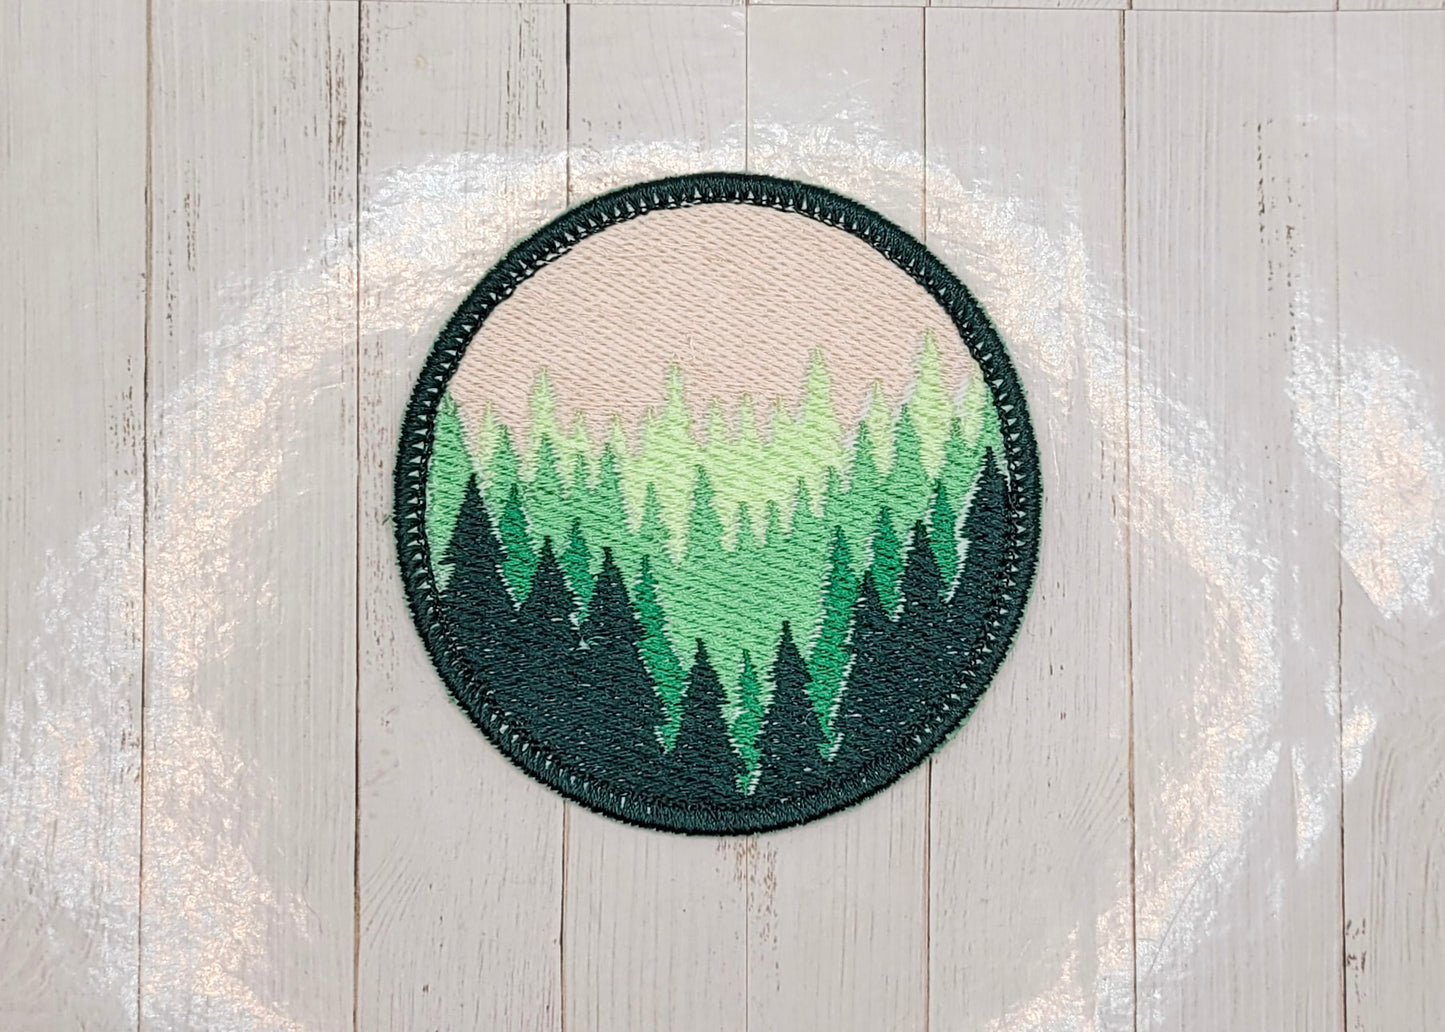 Deep Forest Embroidered Patch